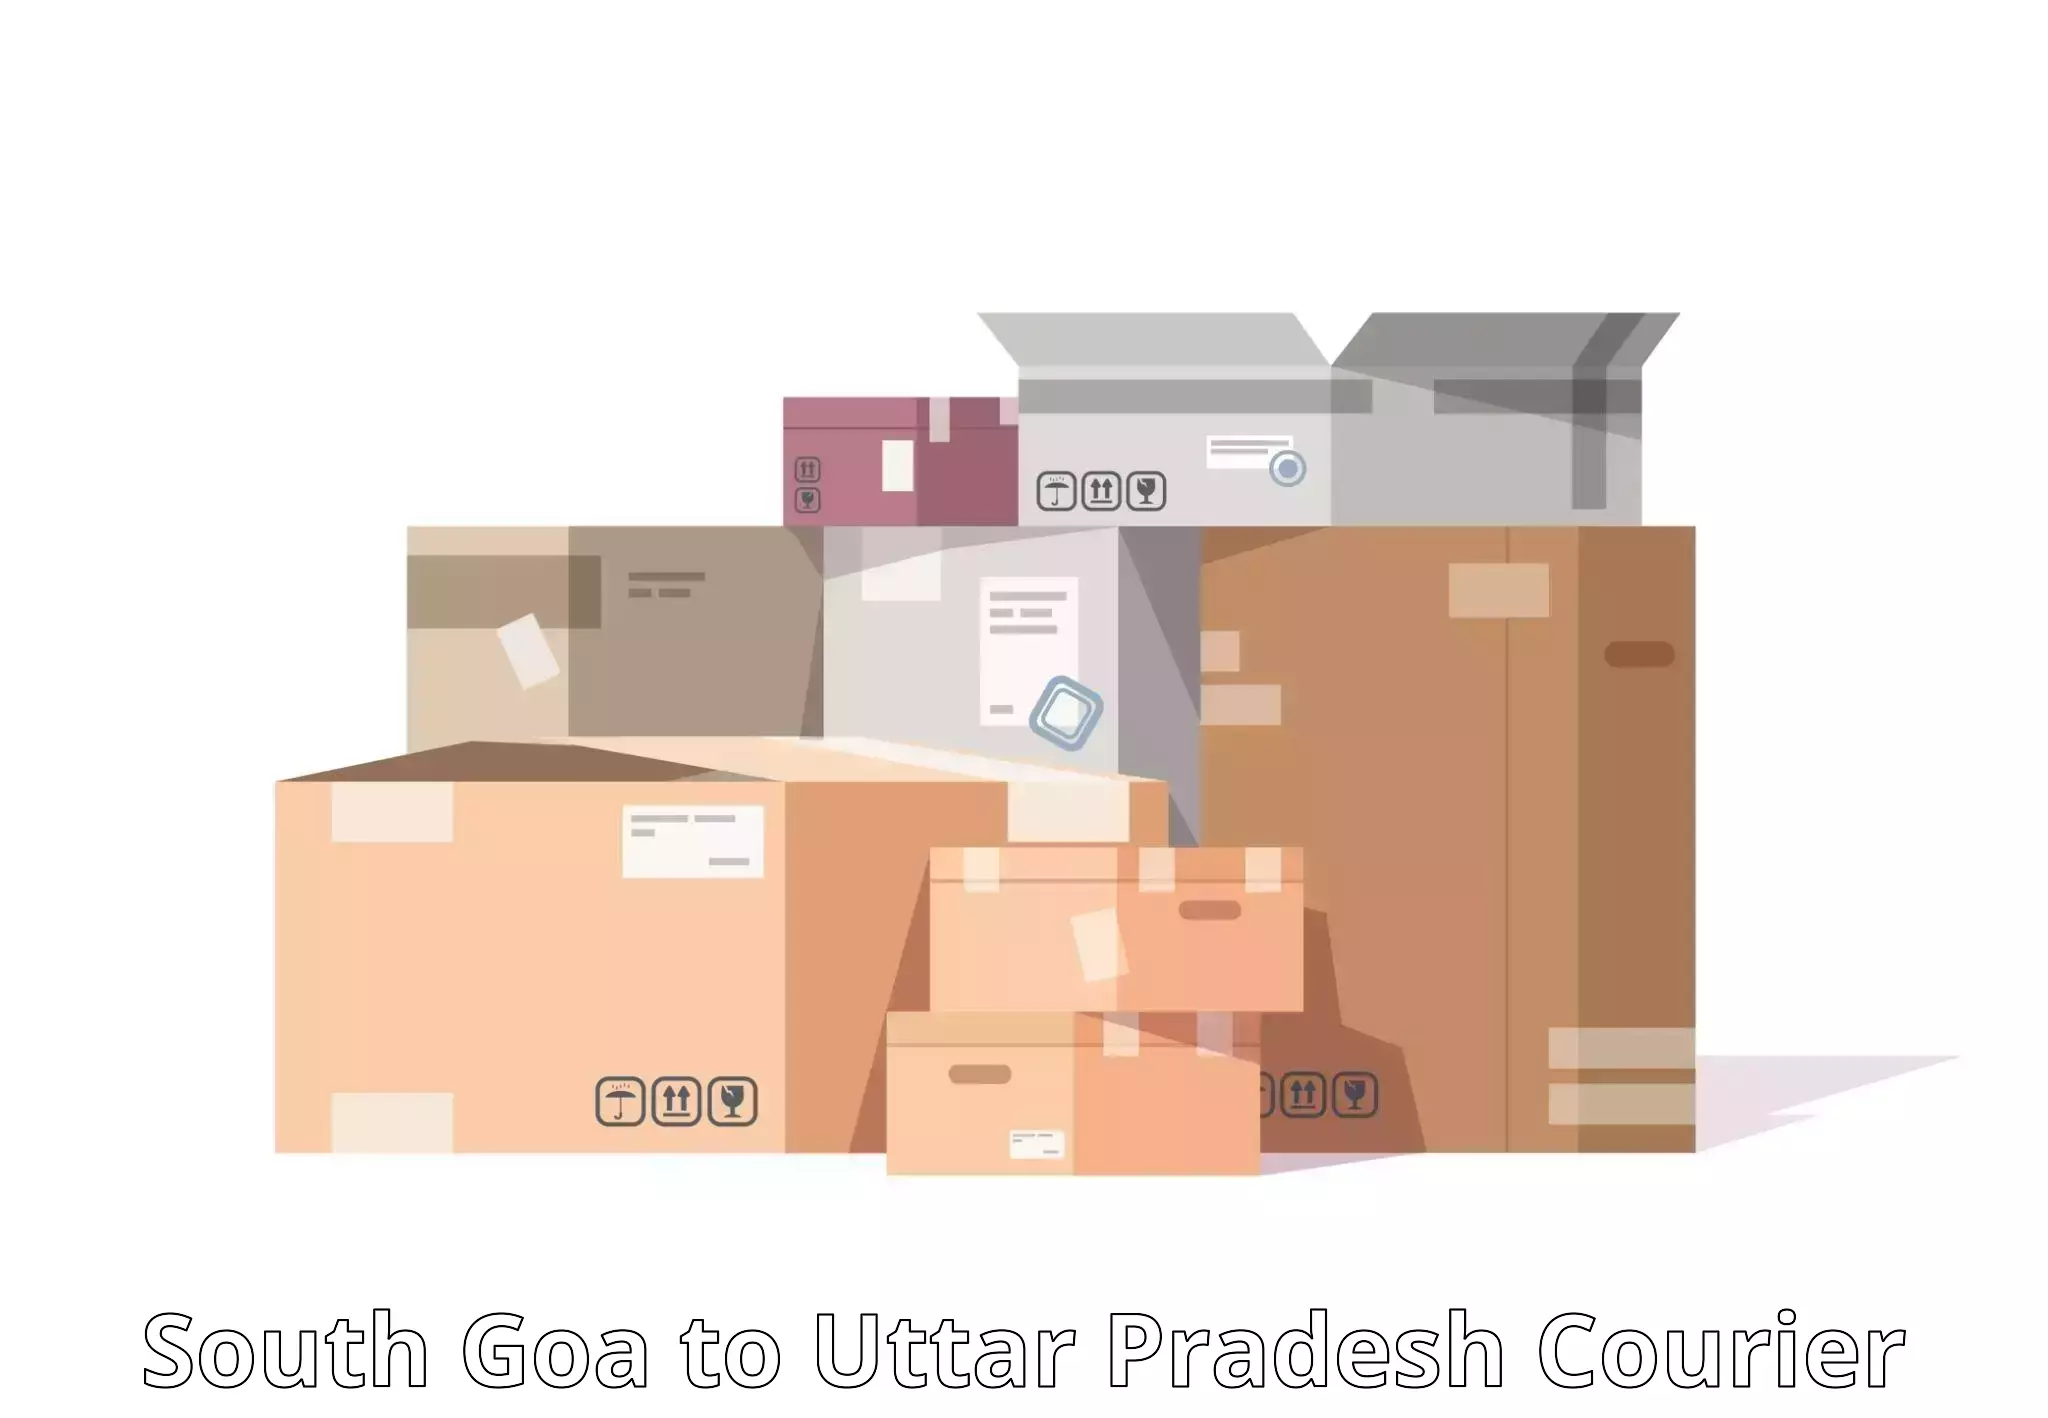 Large package courier South Goa to Lambhua